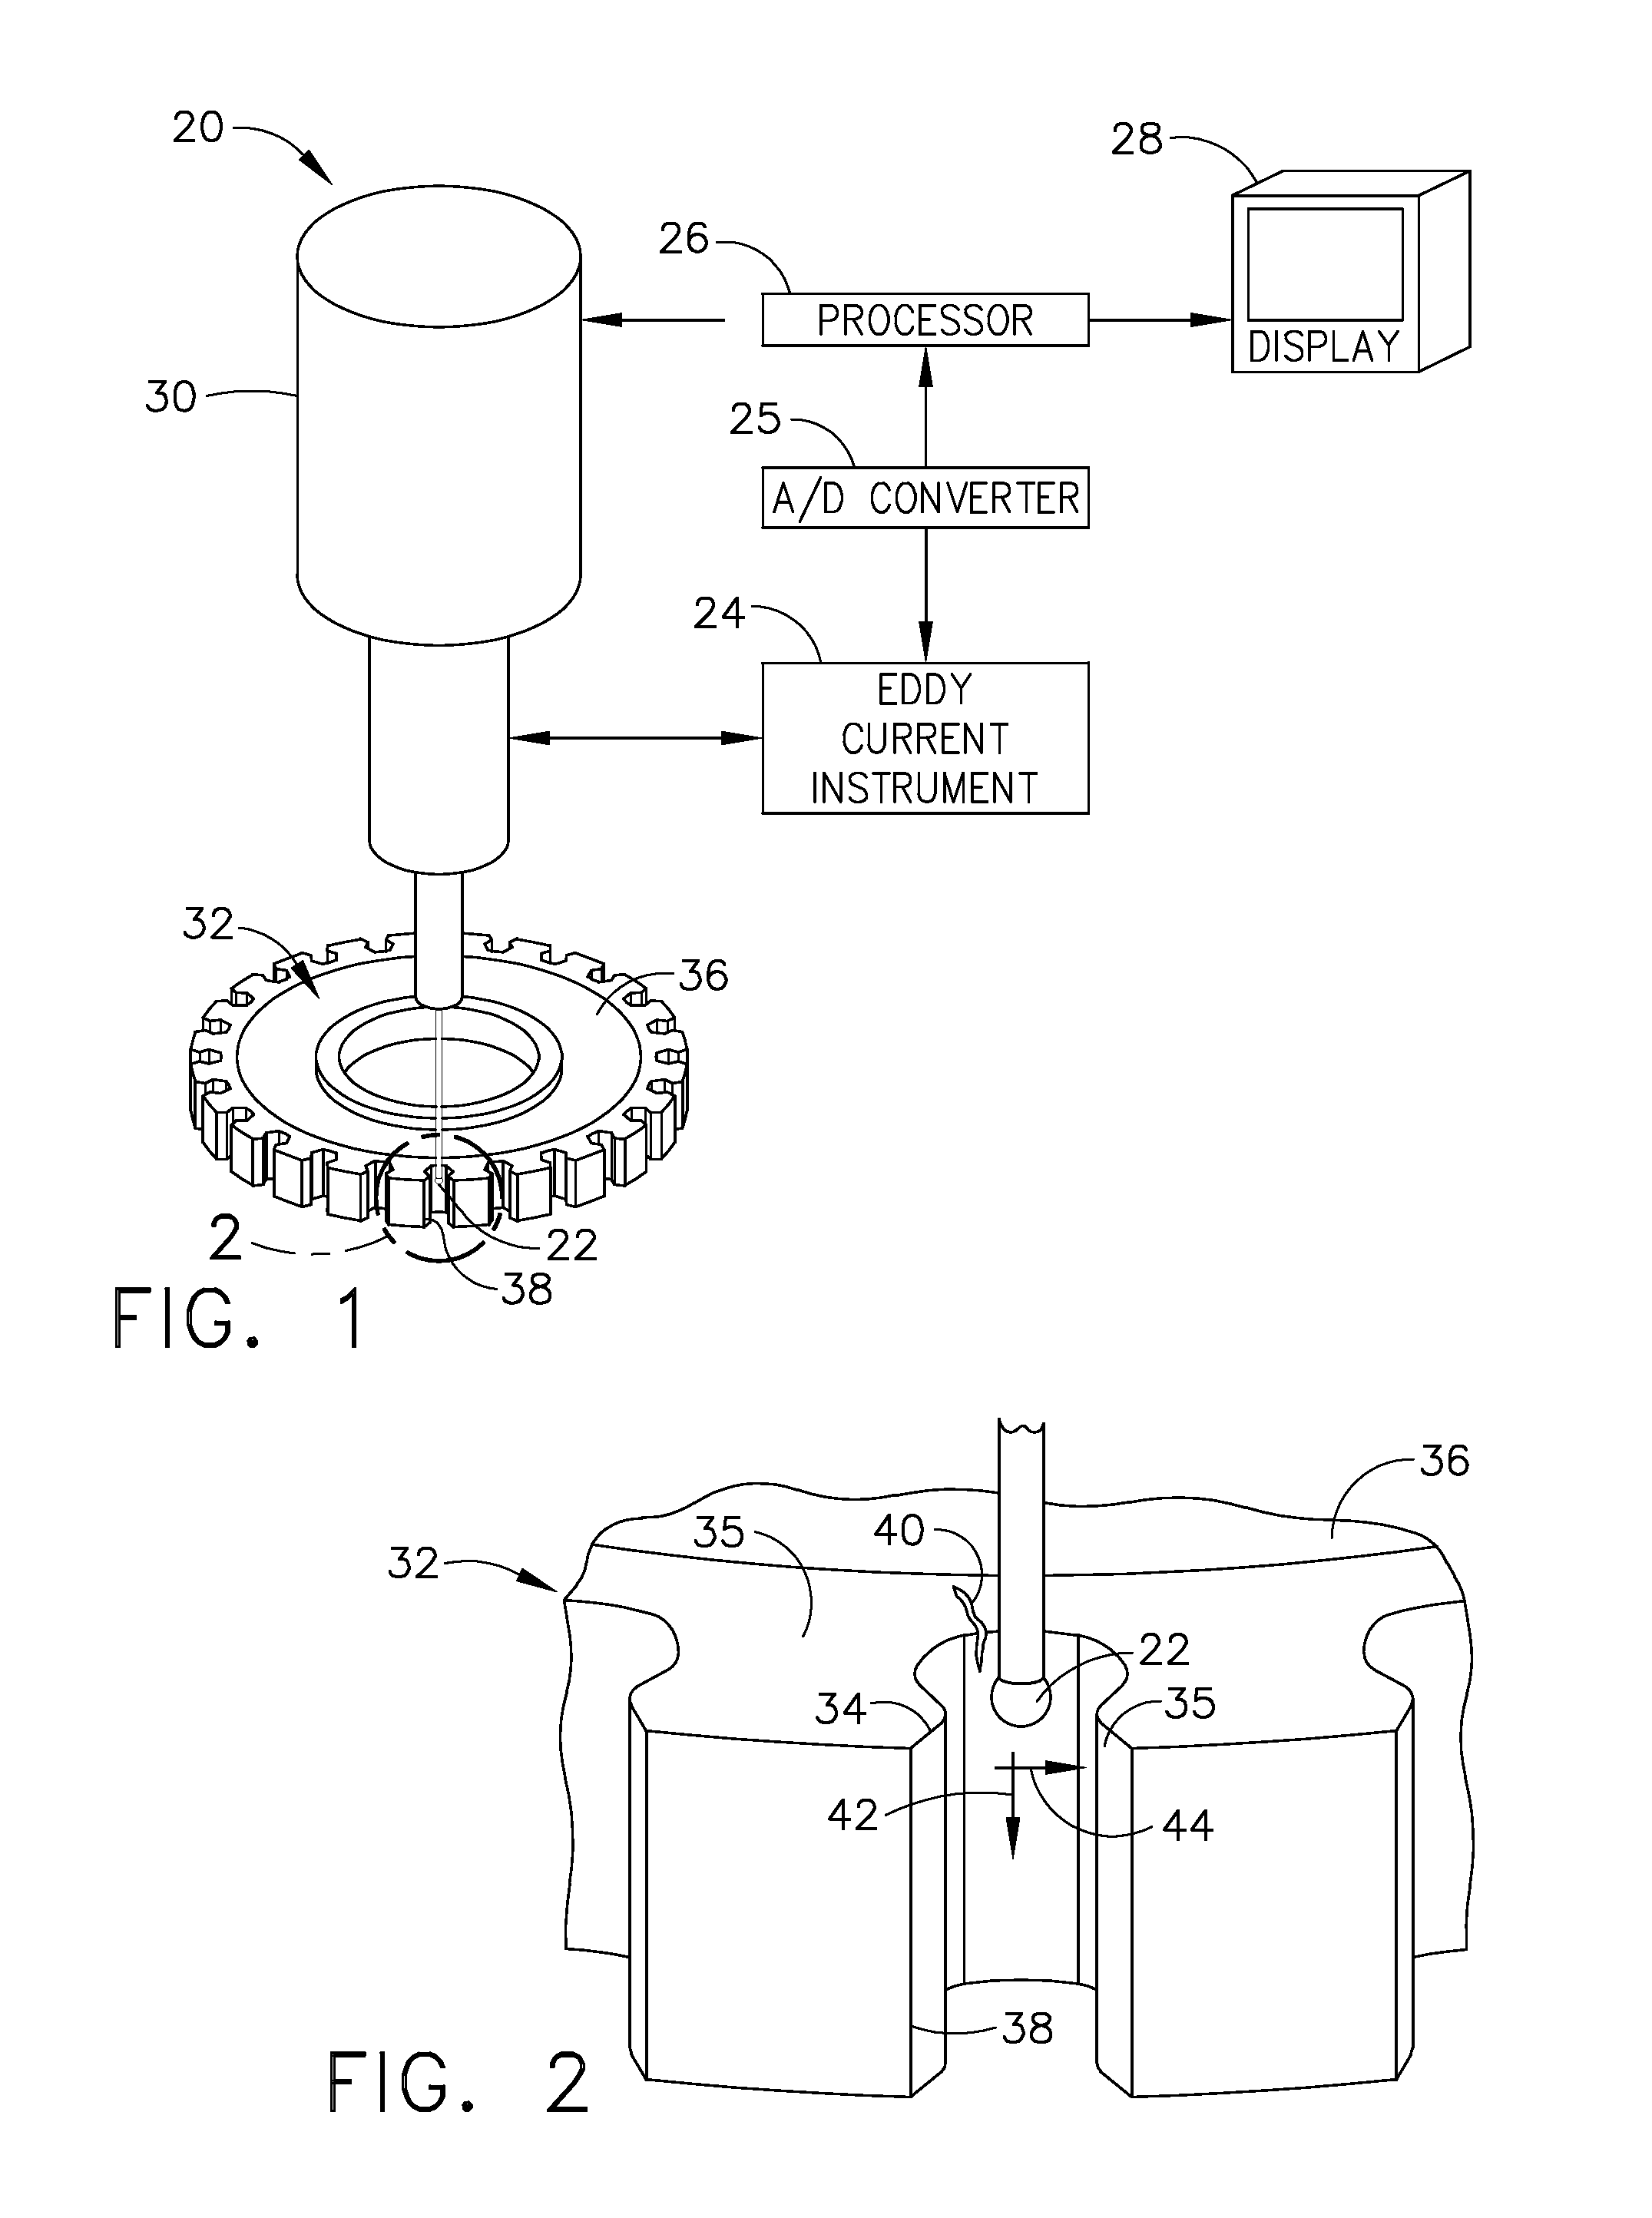 Multi-frequency image processing for inspecting parts having complex geometric shapes